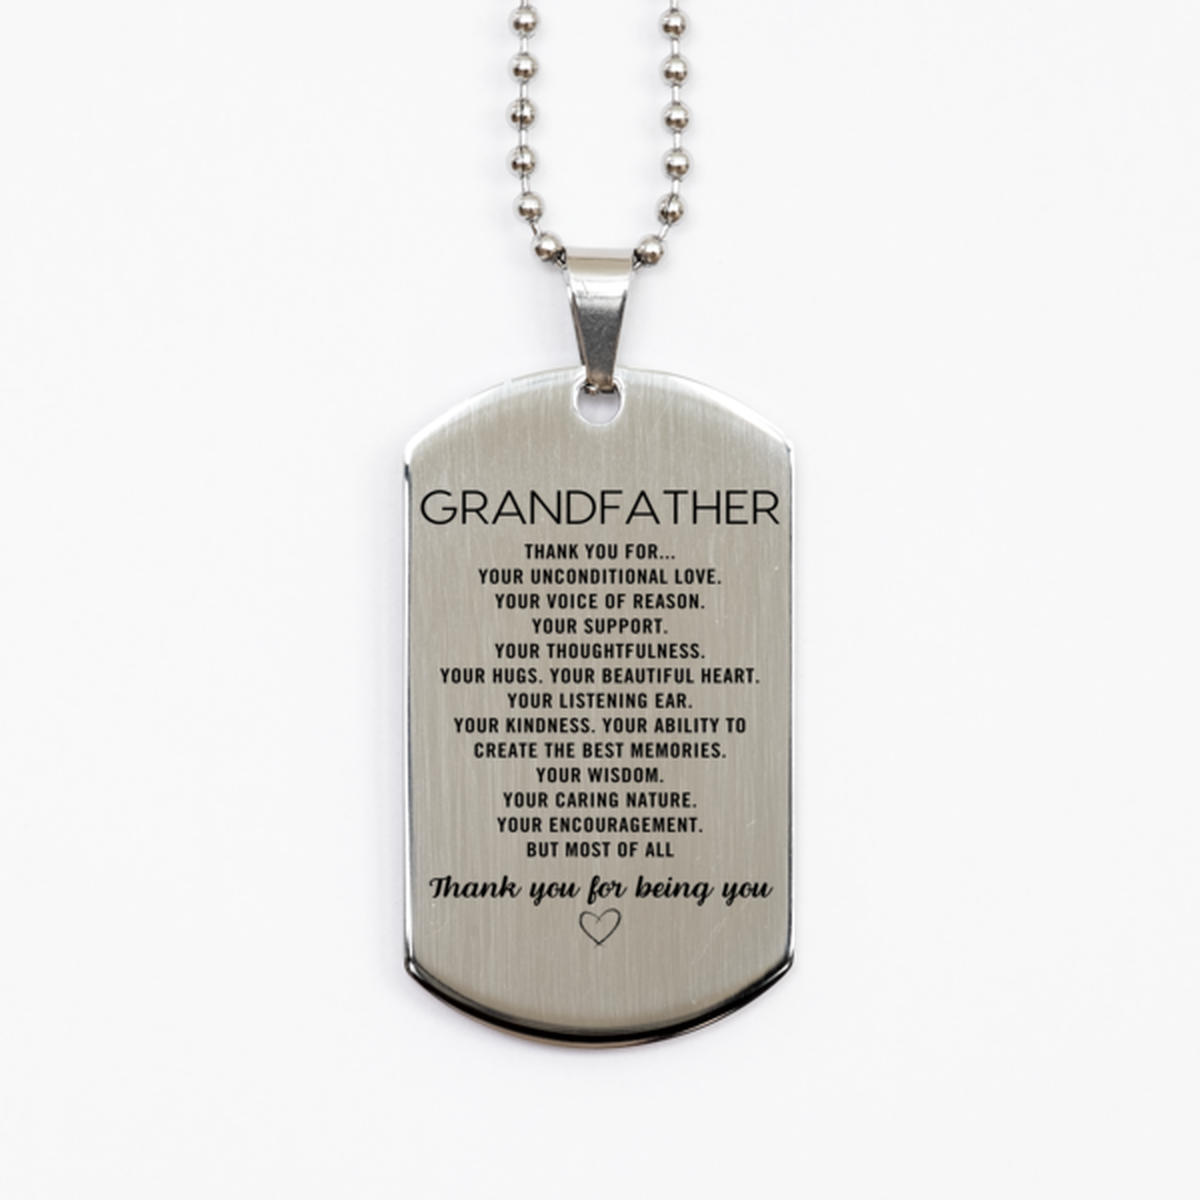 Grandfather Silver Dog Tag Custom, Engraved Gifts For Grandfather Christmas Graduation Birthday Gifts for Men Women Grandfather Thank you for Your unconditional love